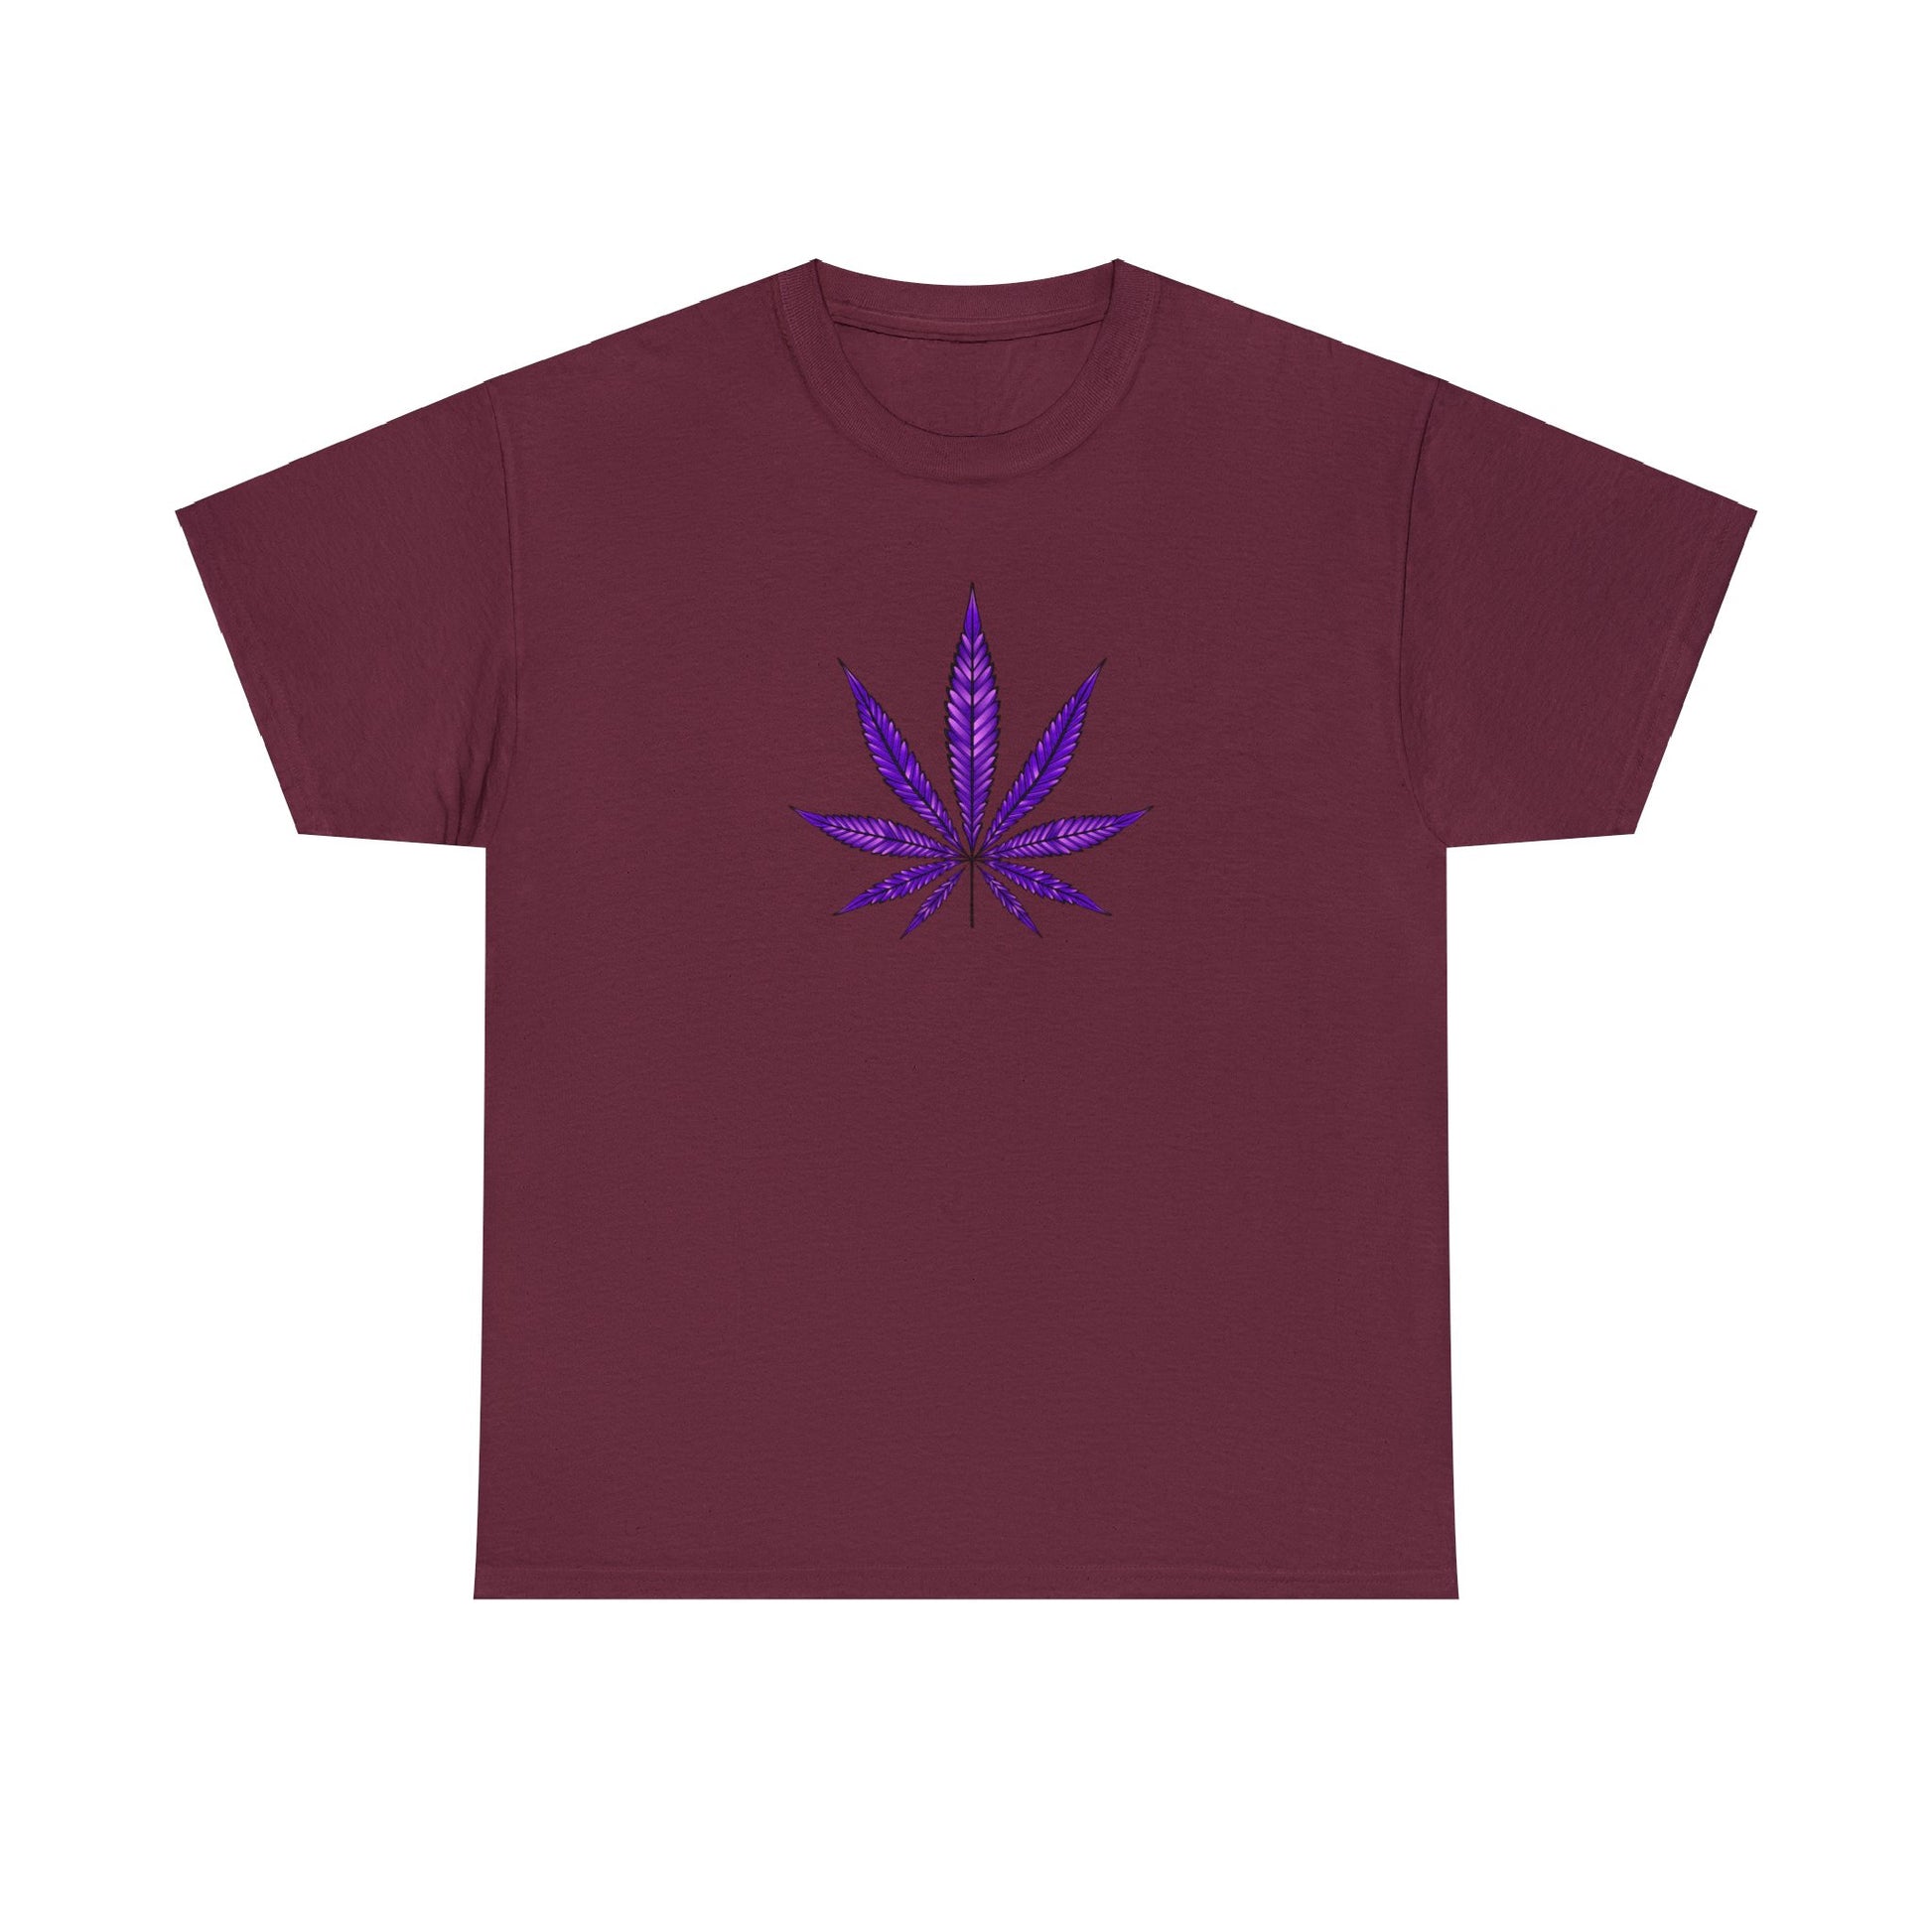 A maroon tee with a central graphic of a stylized Purple Cannabis Leaf on the front, illustrating marijuana culture.